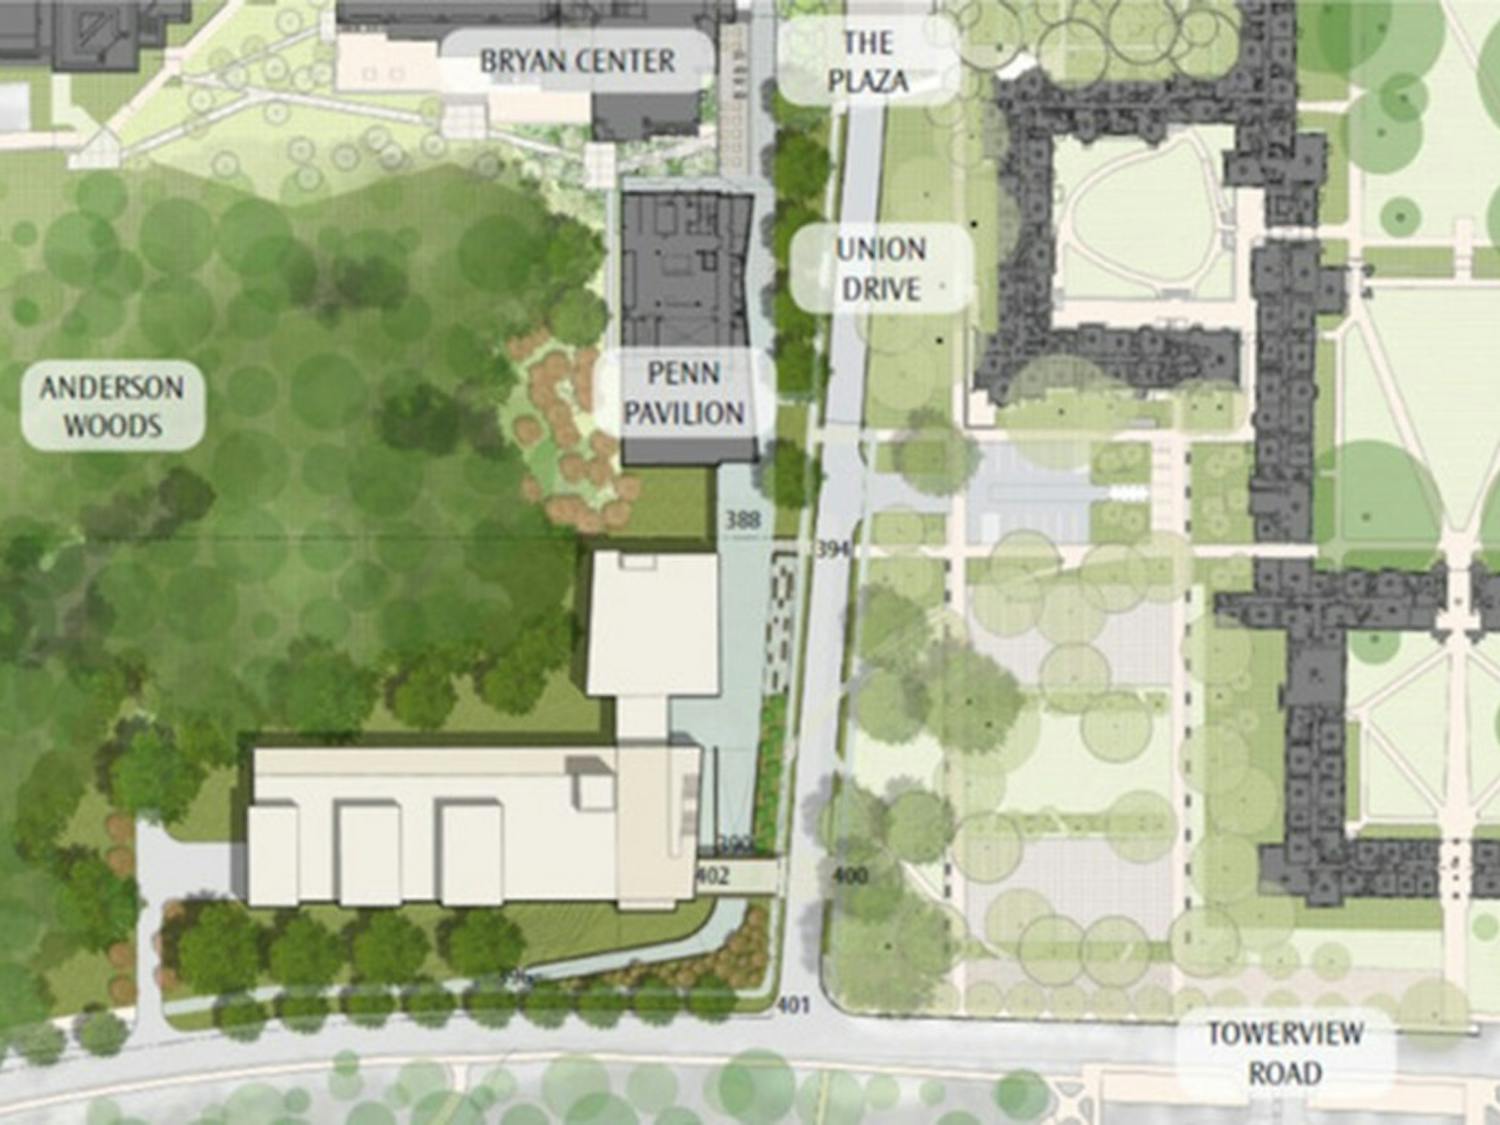 The new Student Health and Wellness Center, the plans for which are pictured above, may feature holistic services such as acupuncture when it opens in 2016.